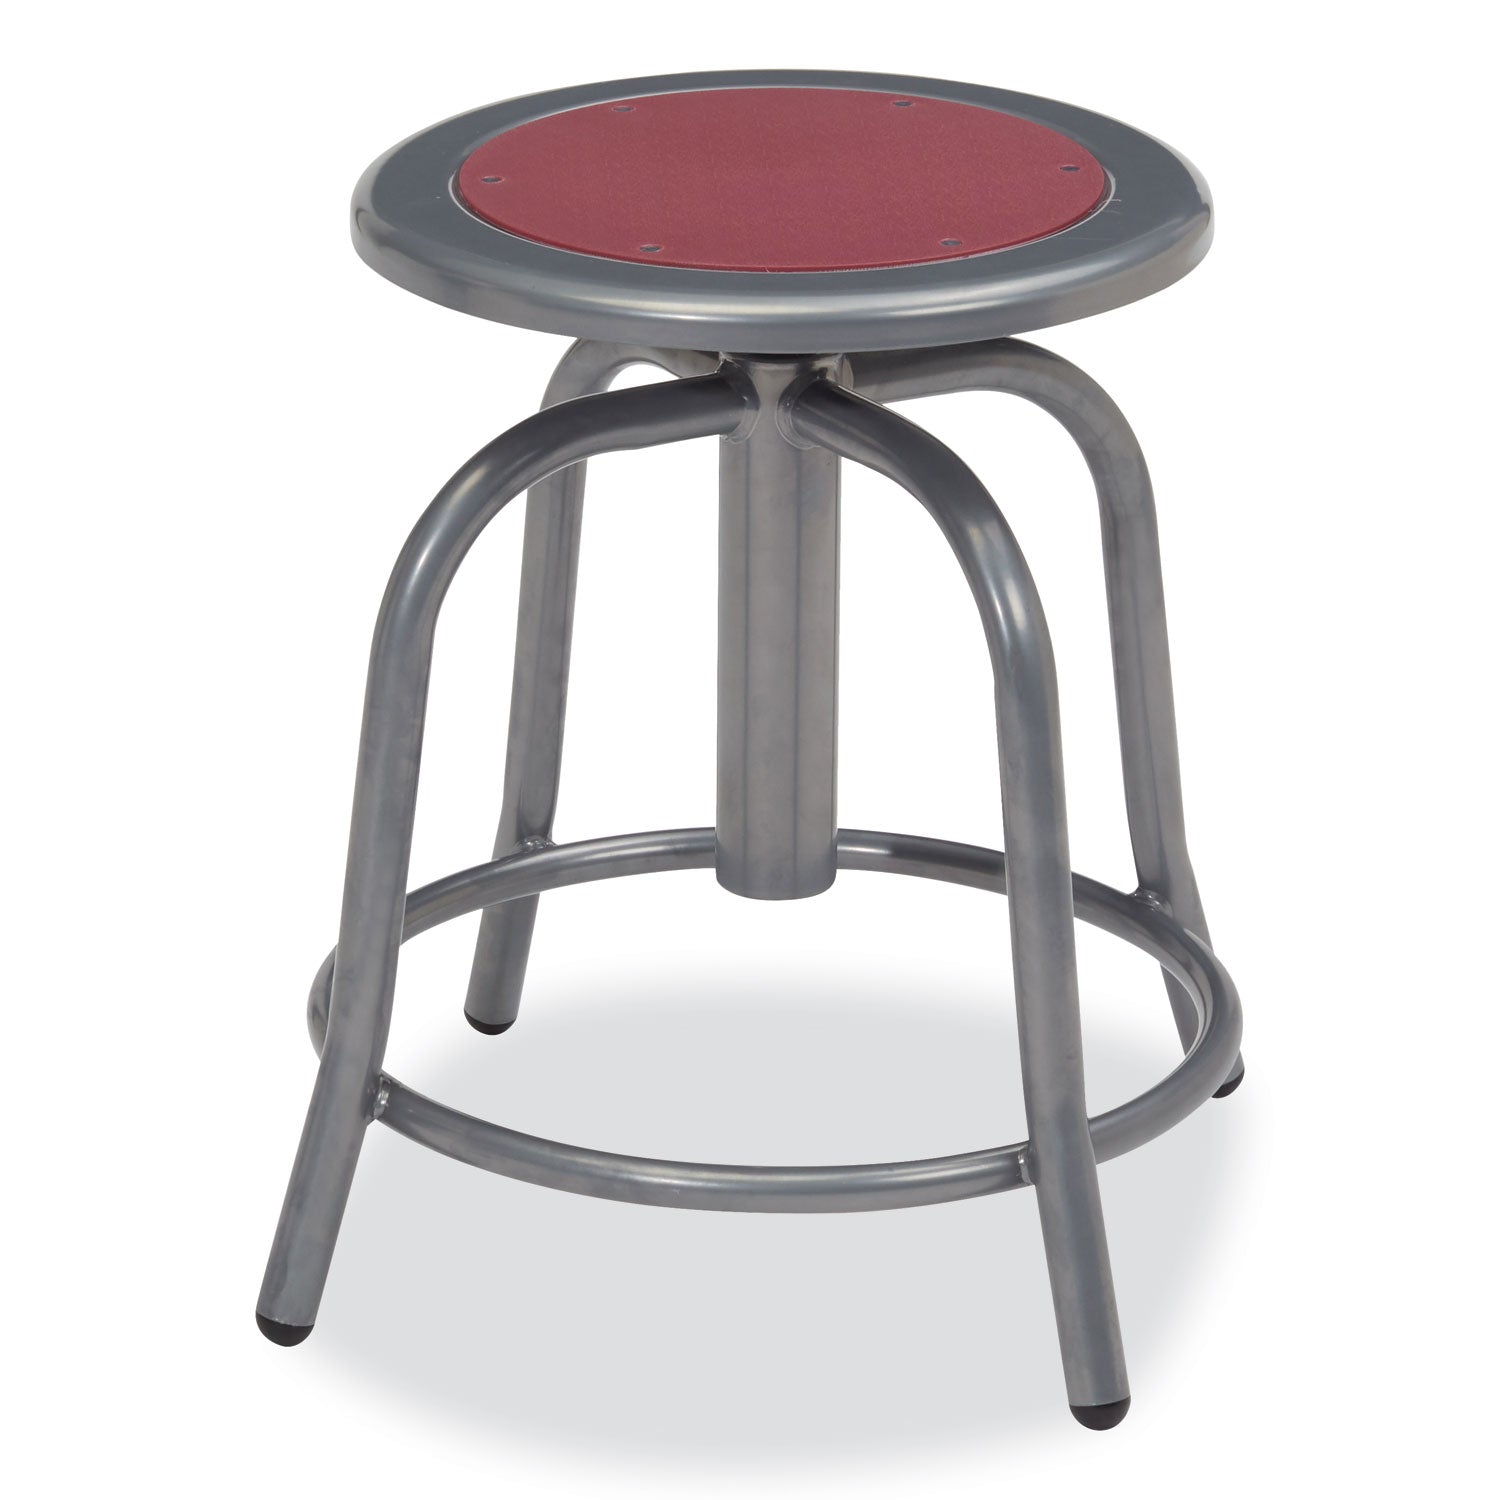 6800-series-height-adj-metal-seat-swivel-stool-supports-300lb-18-24-seat-htburgundy-seat-gray-baseships-in-1-3-bus-days_nps681802 - 1